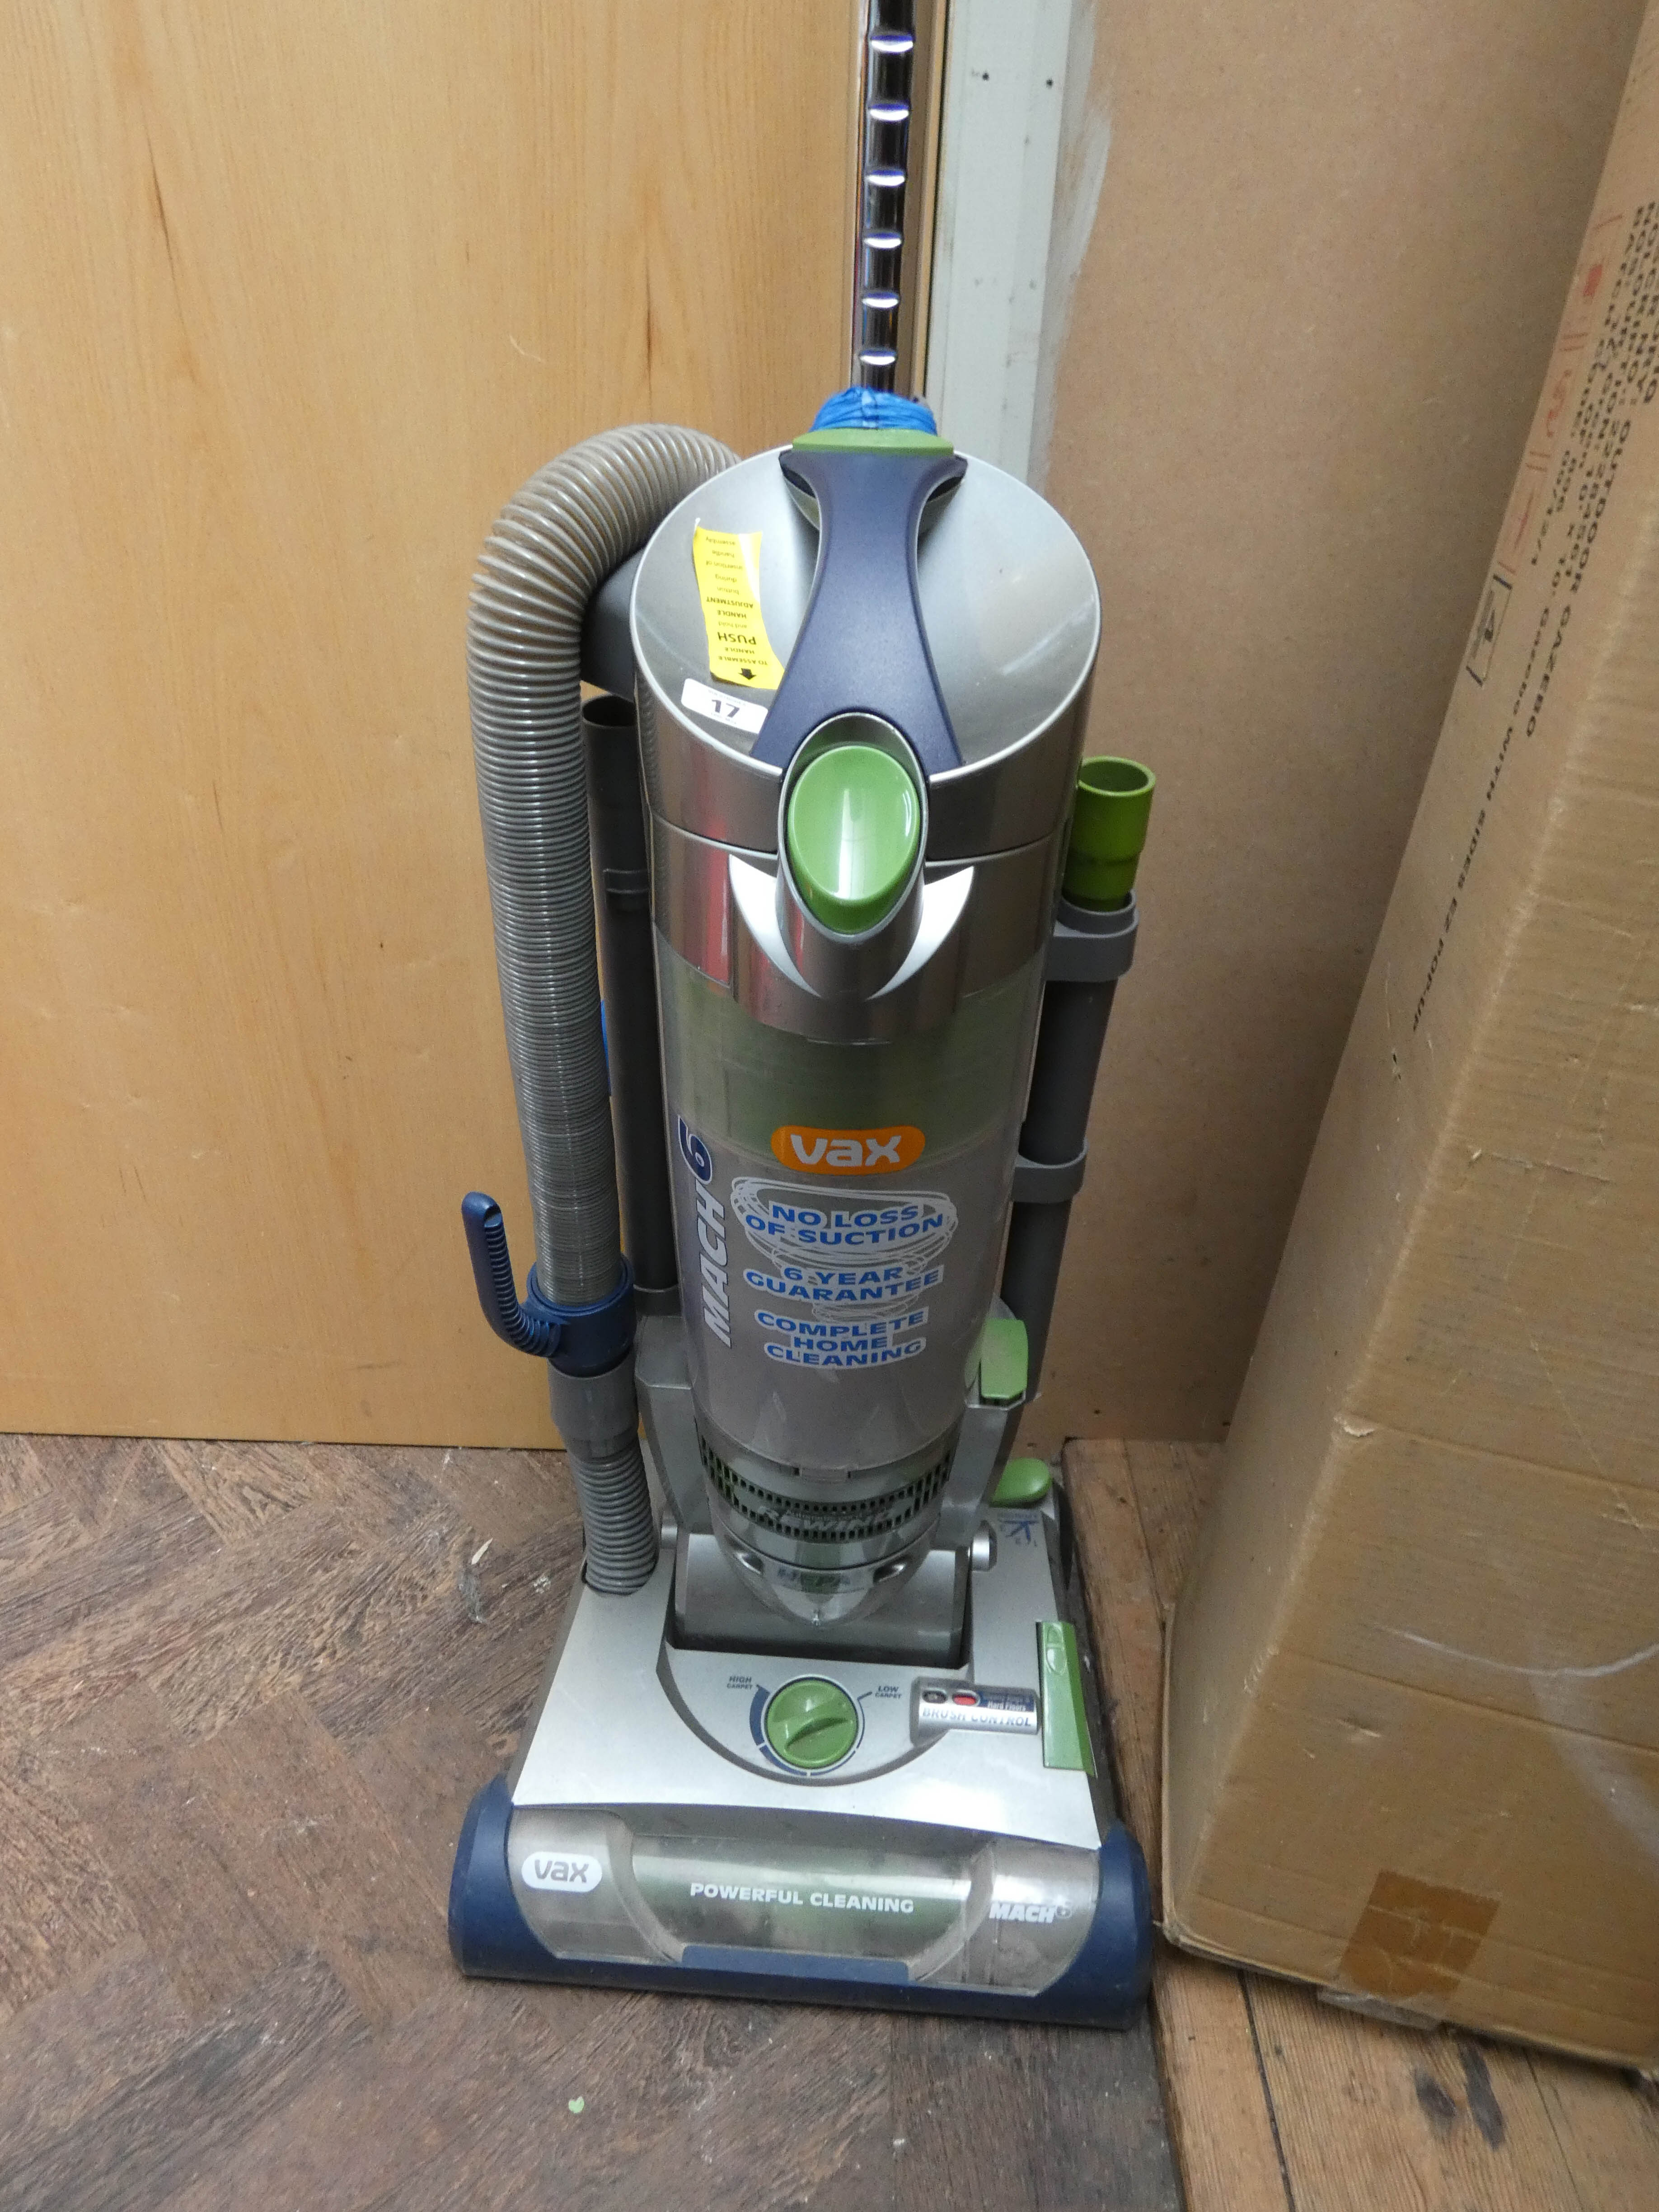 A very heavy Vax upright vacuum cleaner